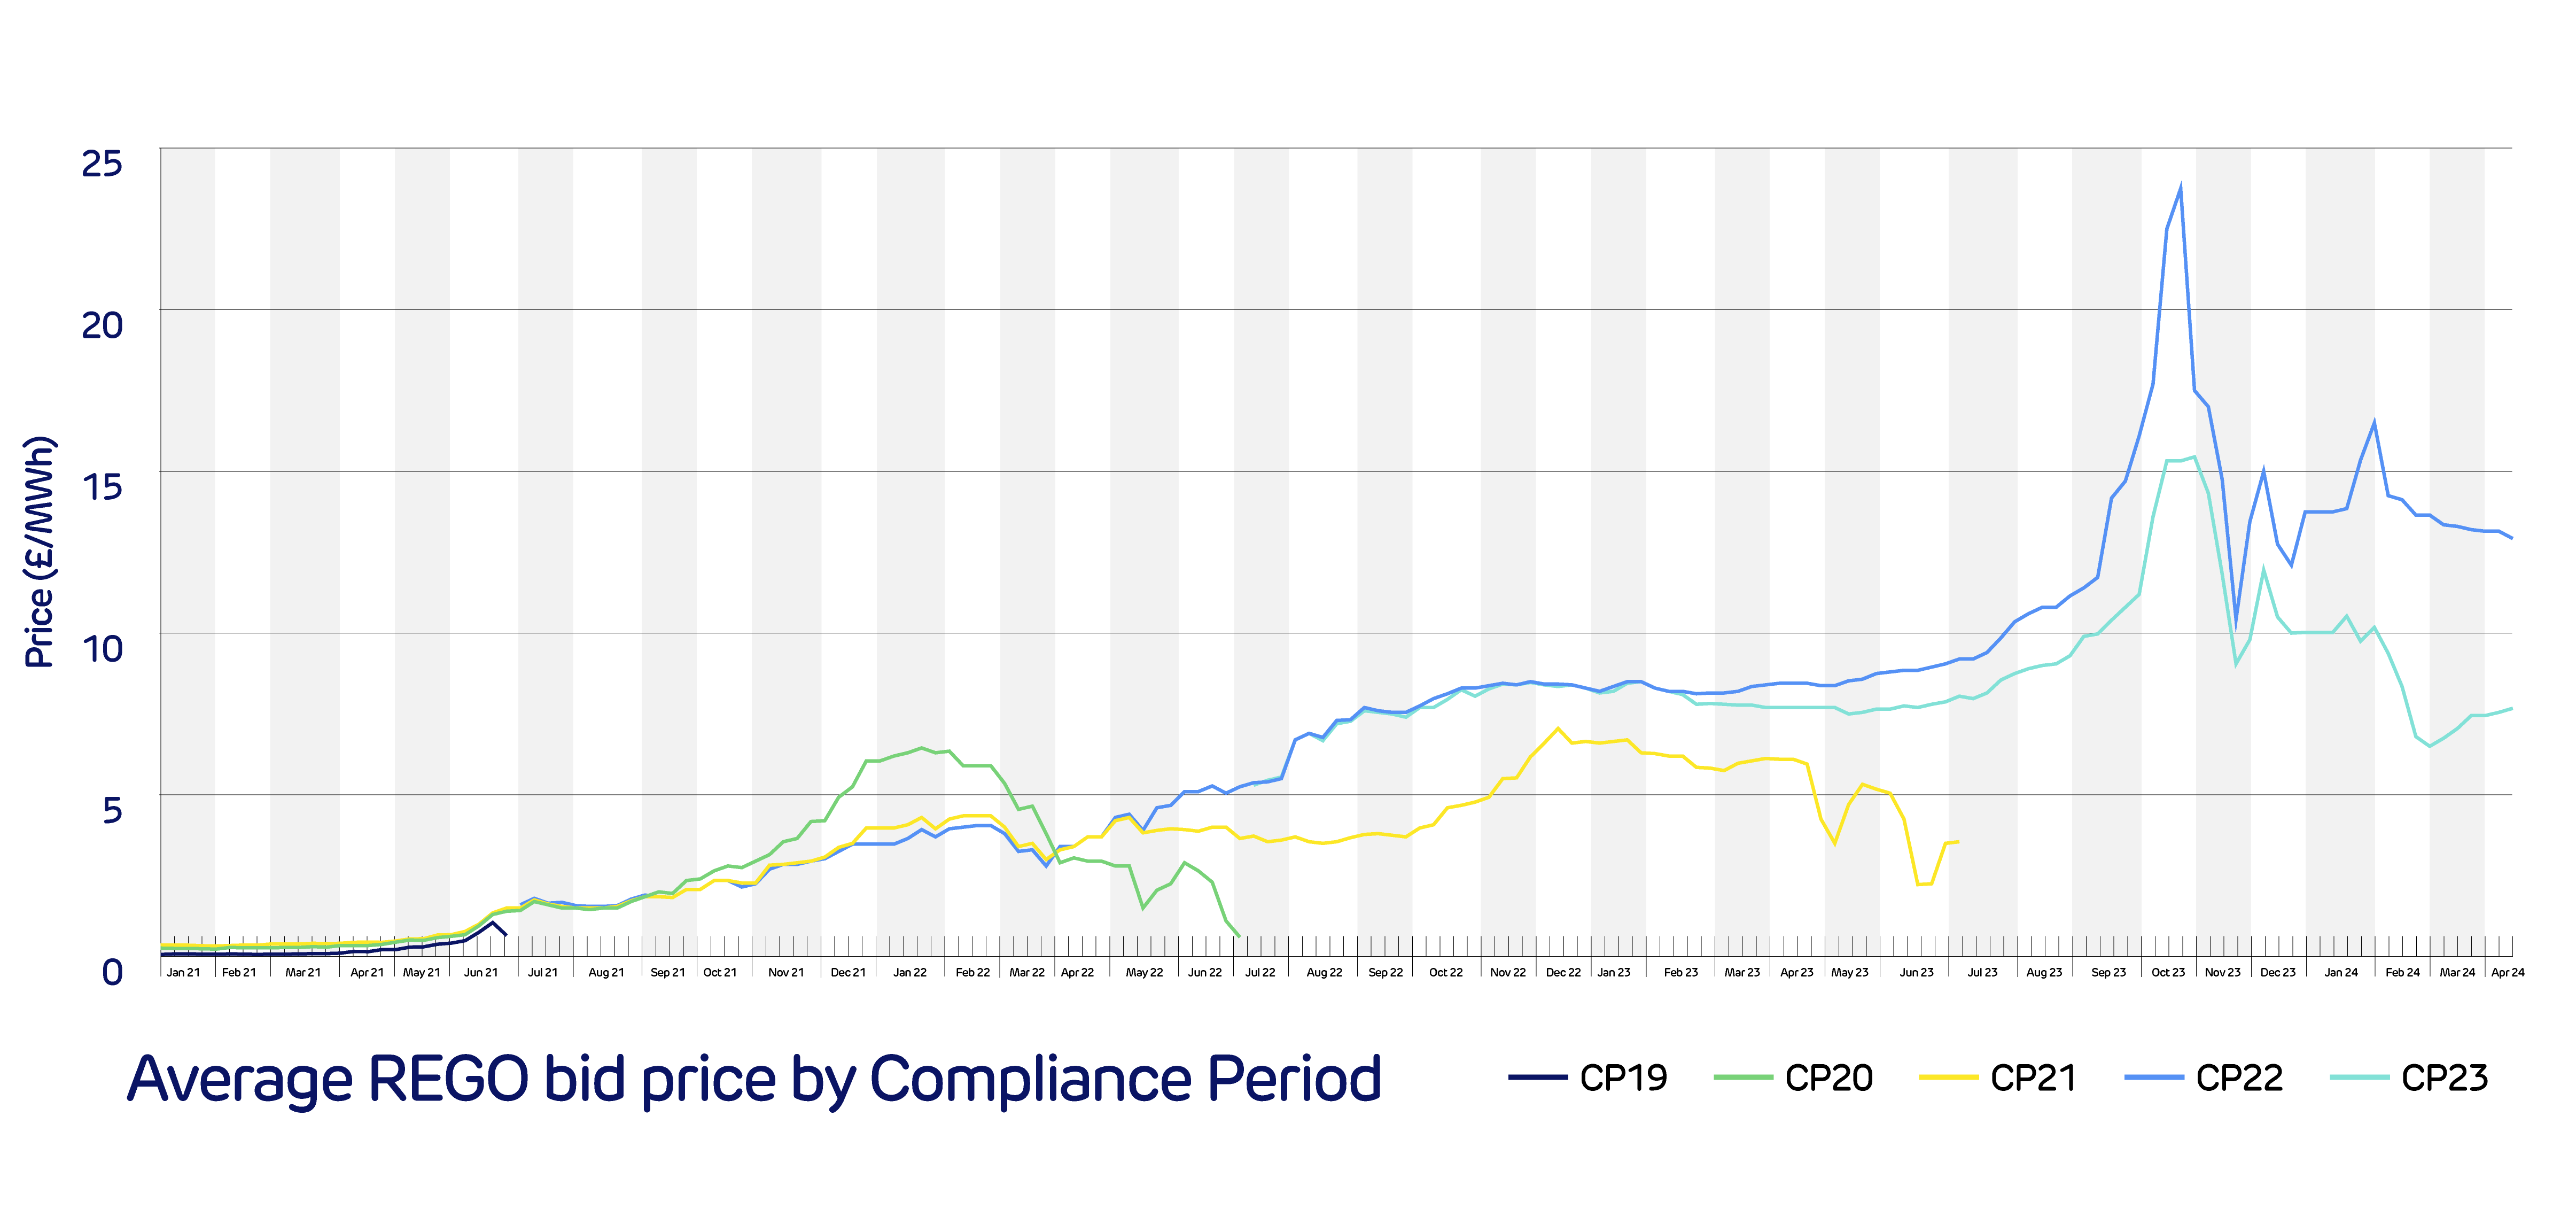 REGO price by Compliance Period